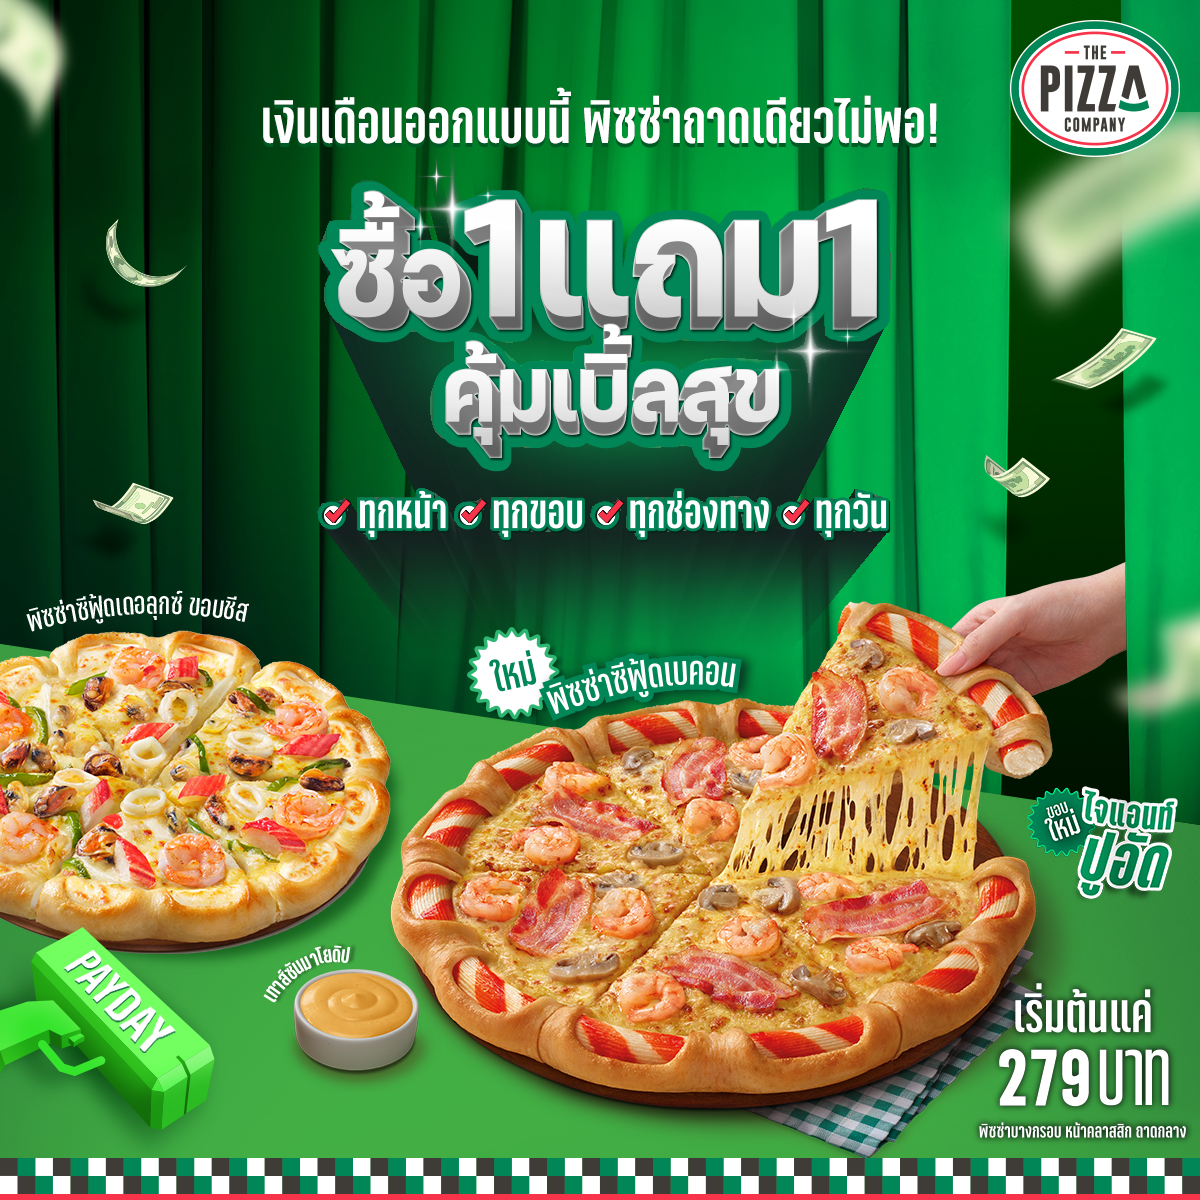 9 march 2023 deals - the pizza company